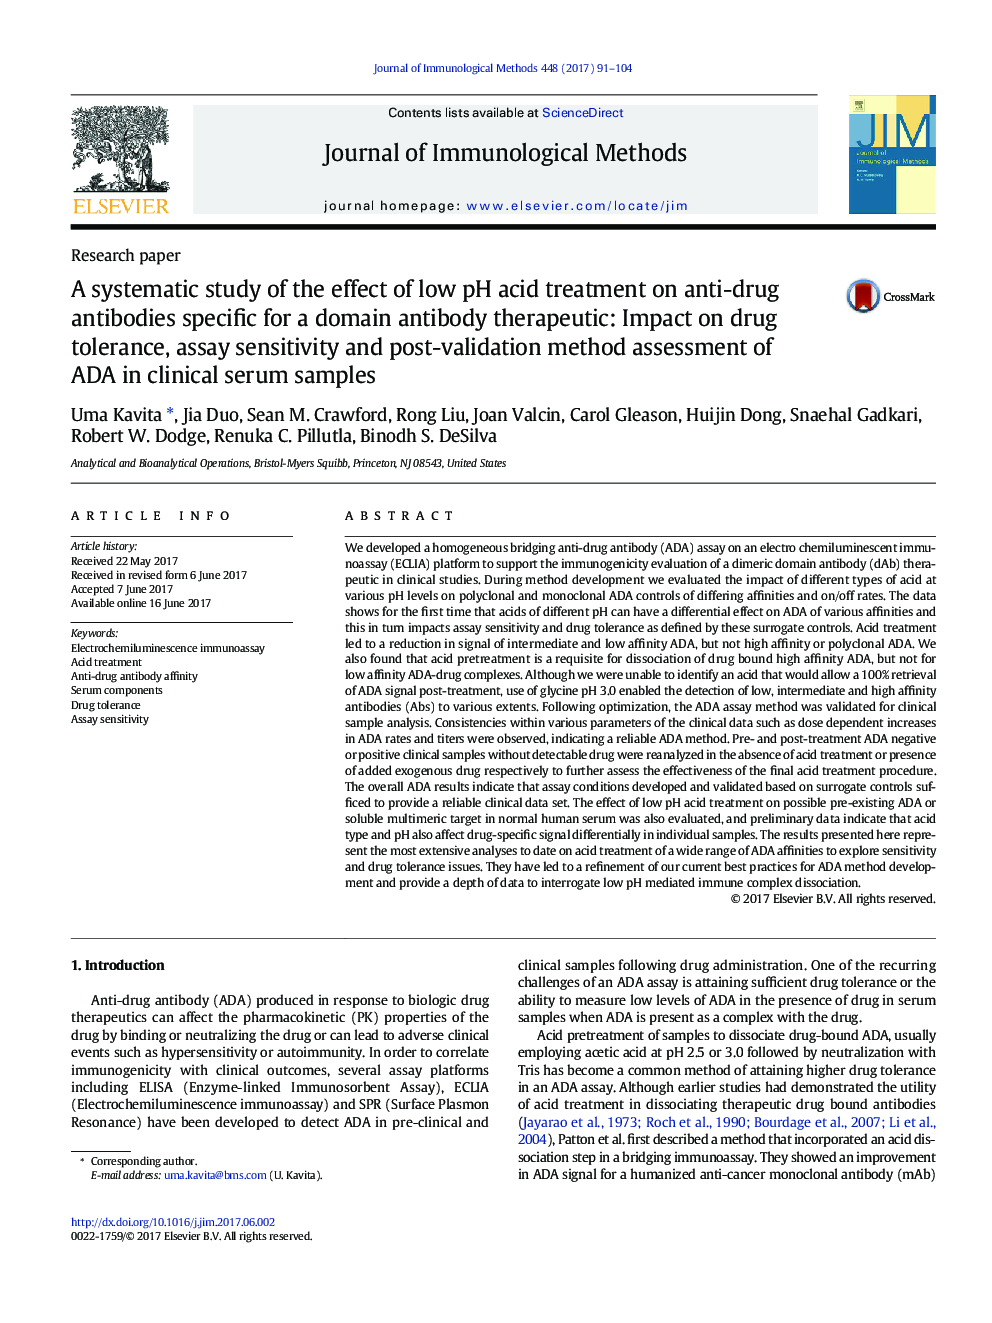 Research paperA systematic study of the effect of low pH acid treatment on anti-drug antibodies specific for a domain antibody therapeutic: Impact on drug tolerance, assay sensitivity and post-validation method assessment of ADA in clinical serum samples